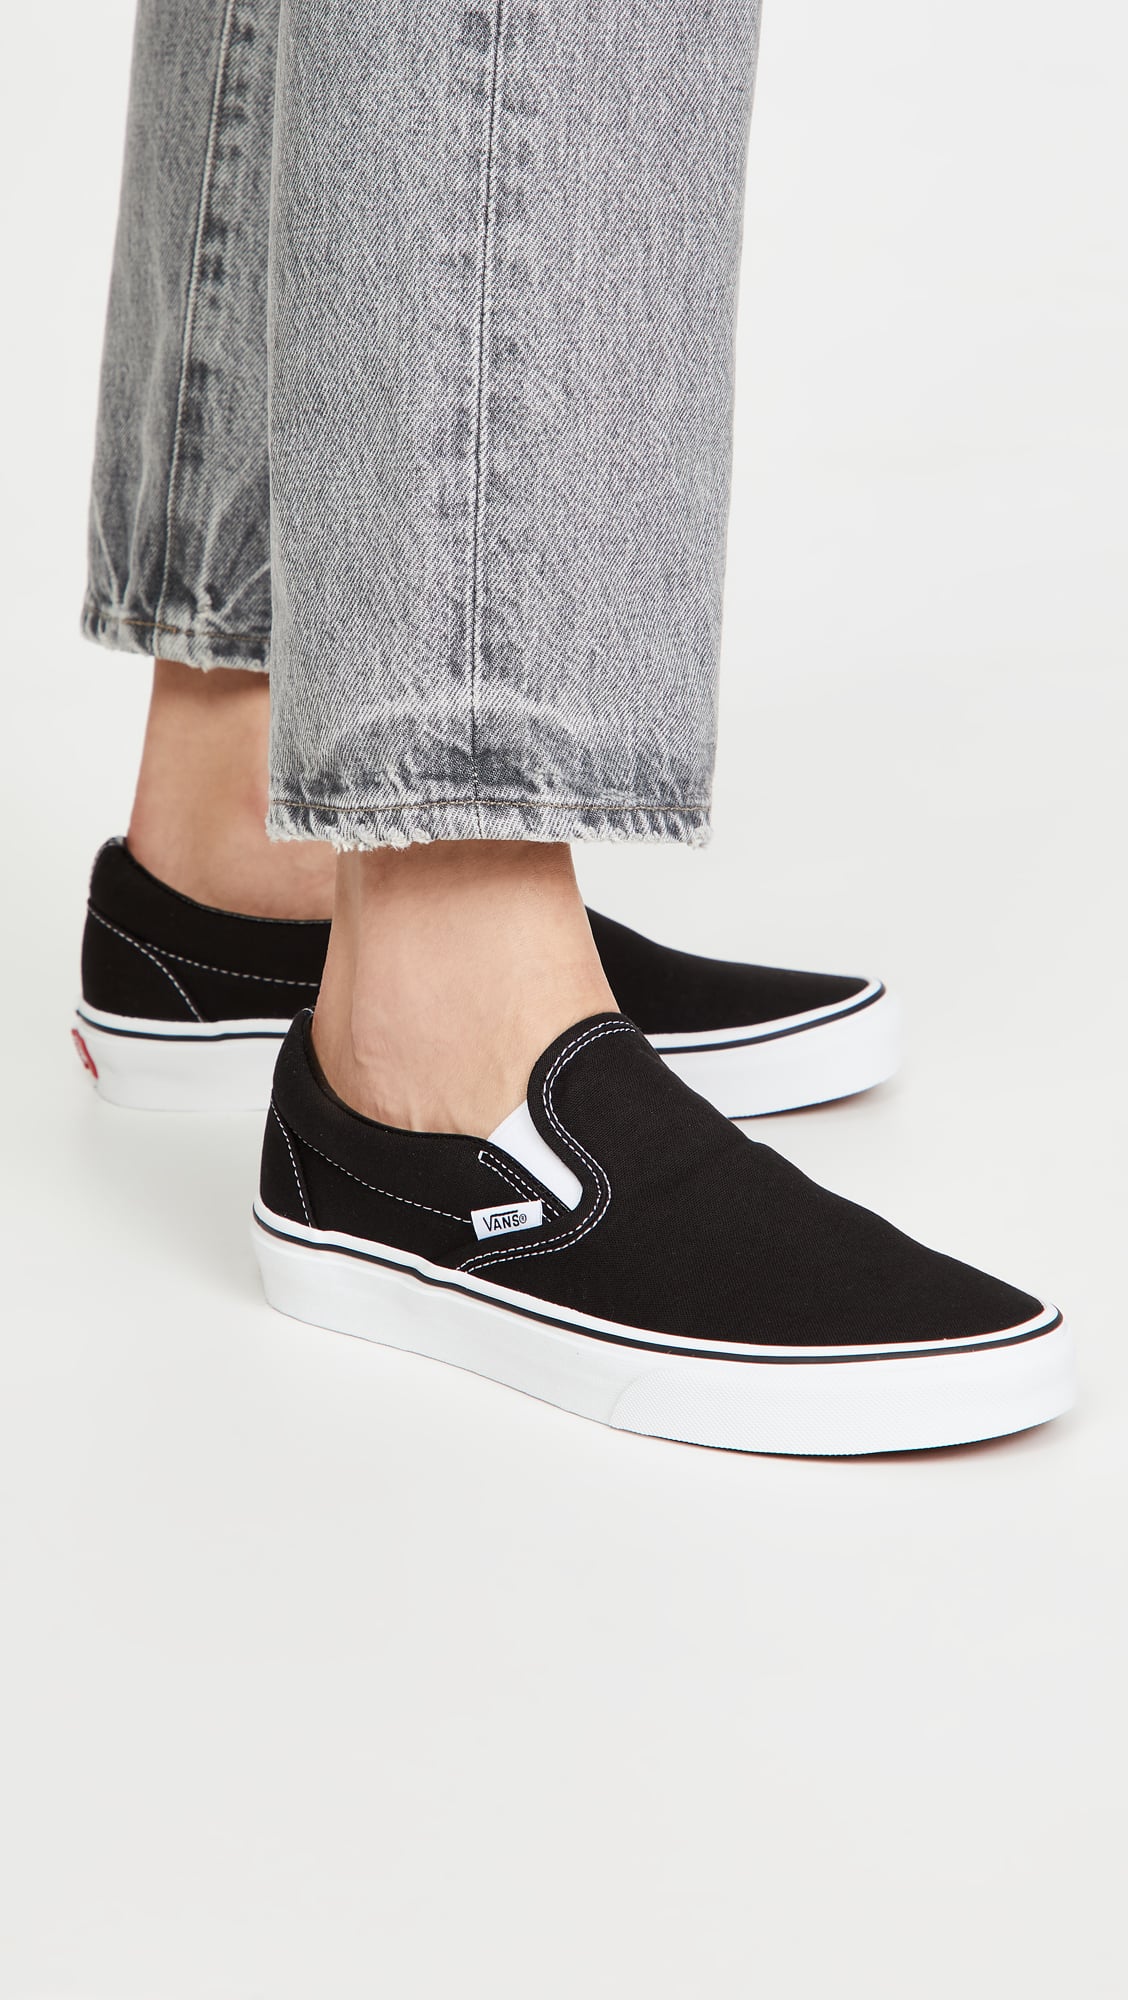 Slip on Black and White Trainers